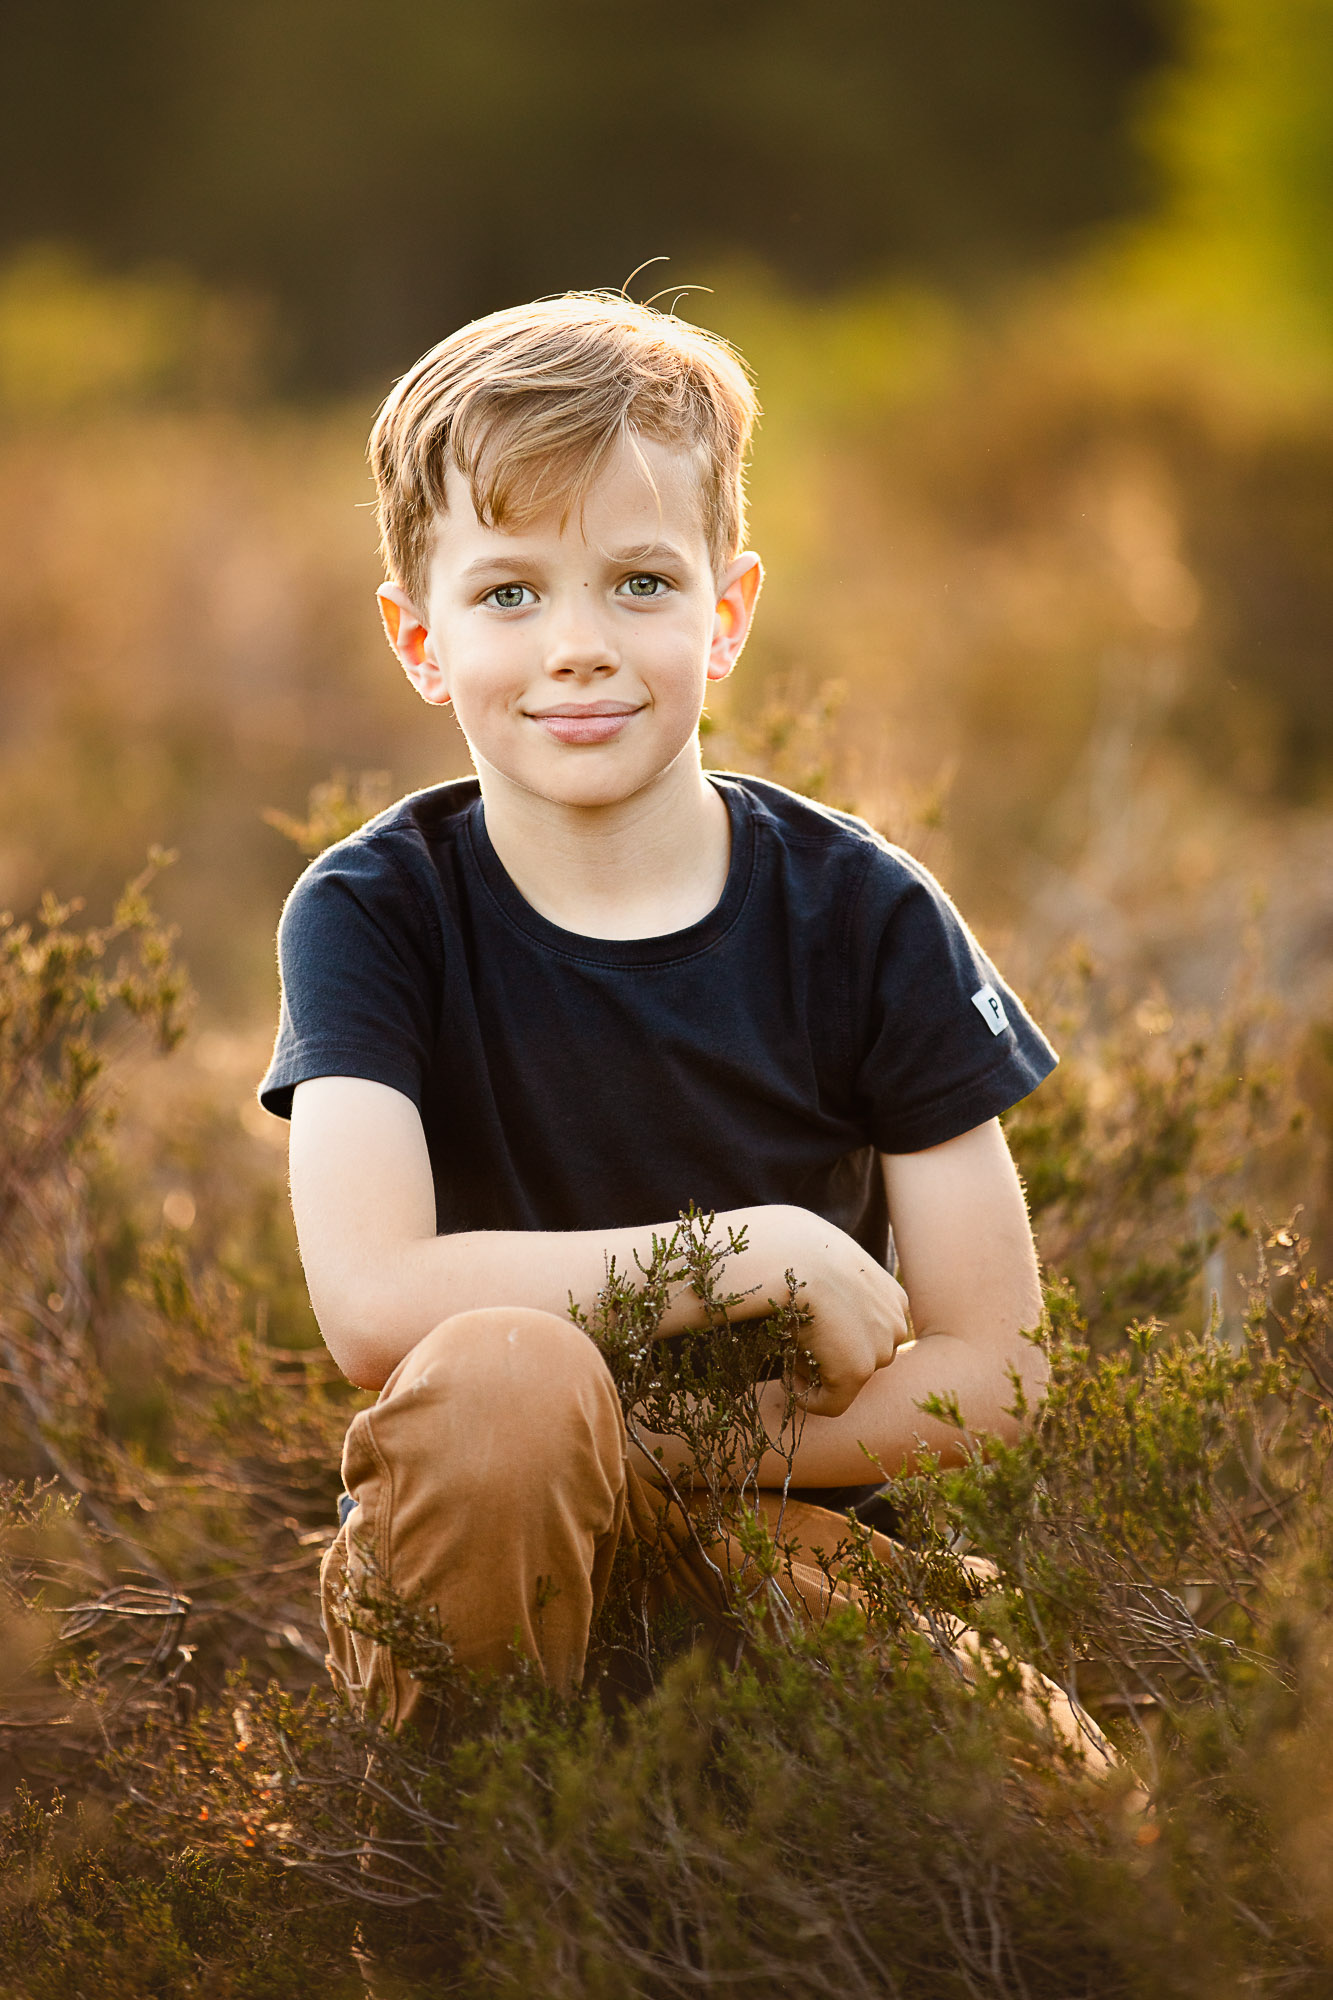 Guildford boy in Family Photo shoot in Surrey